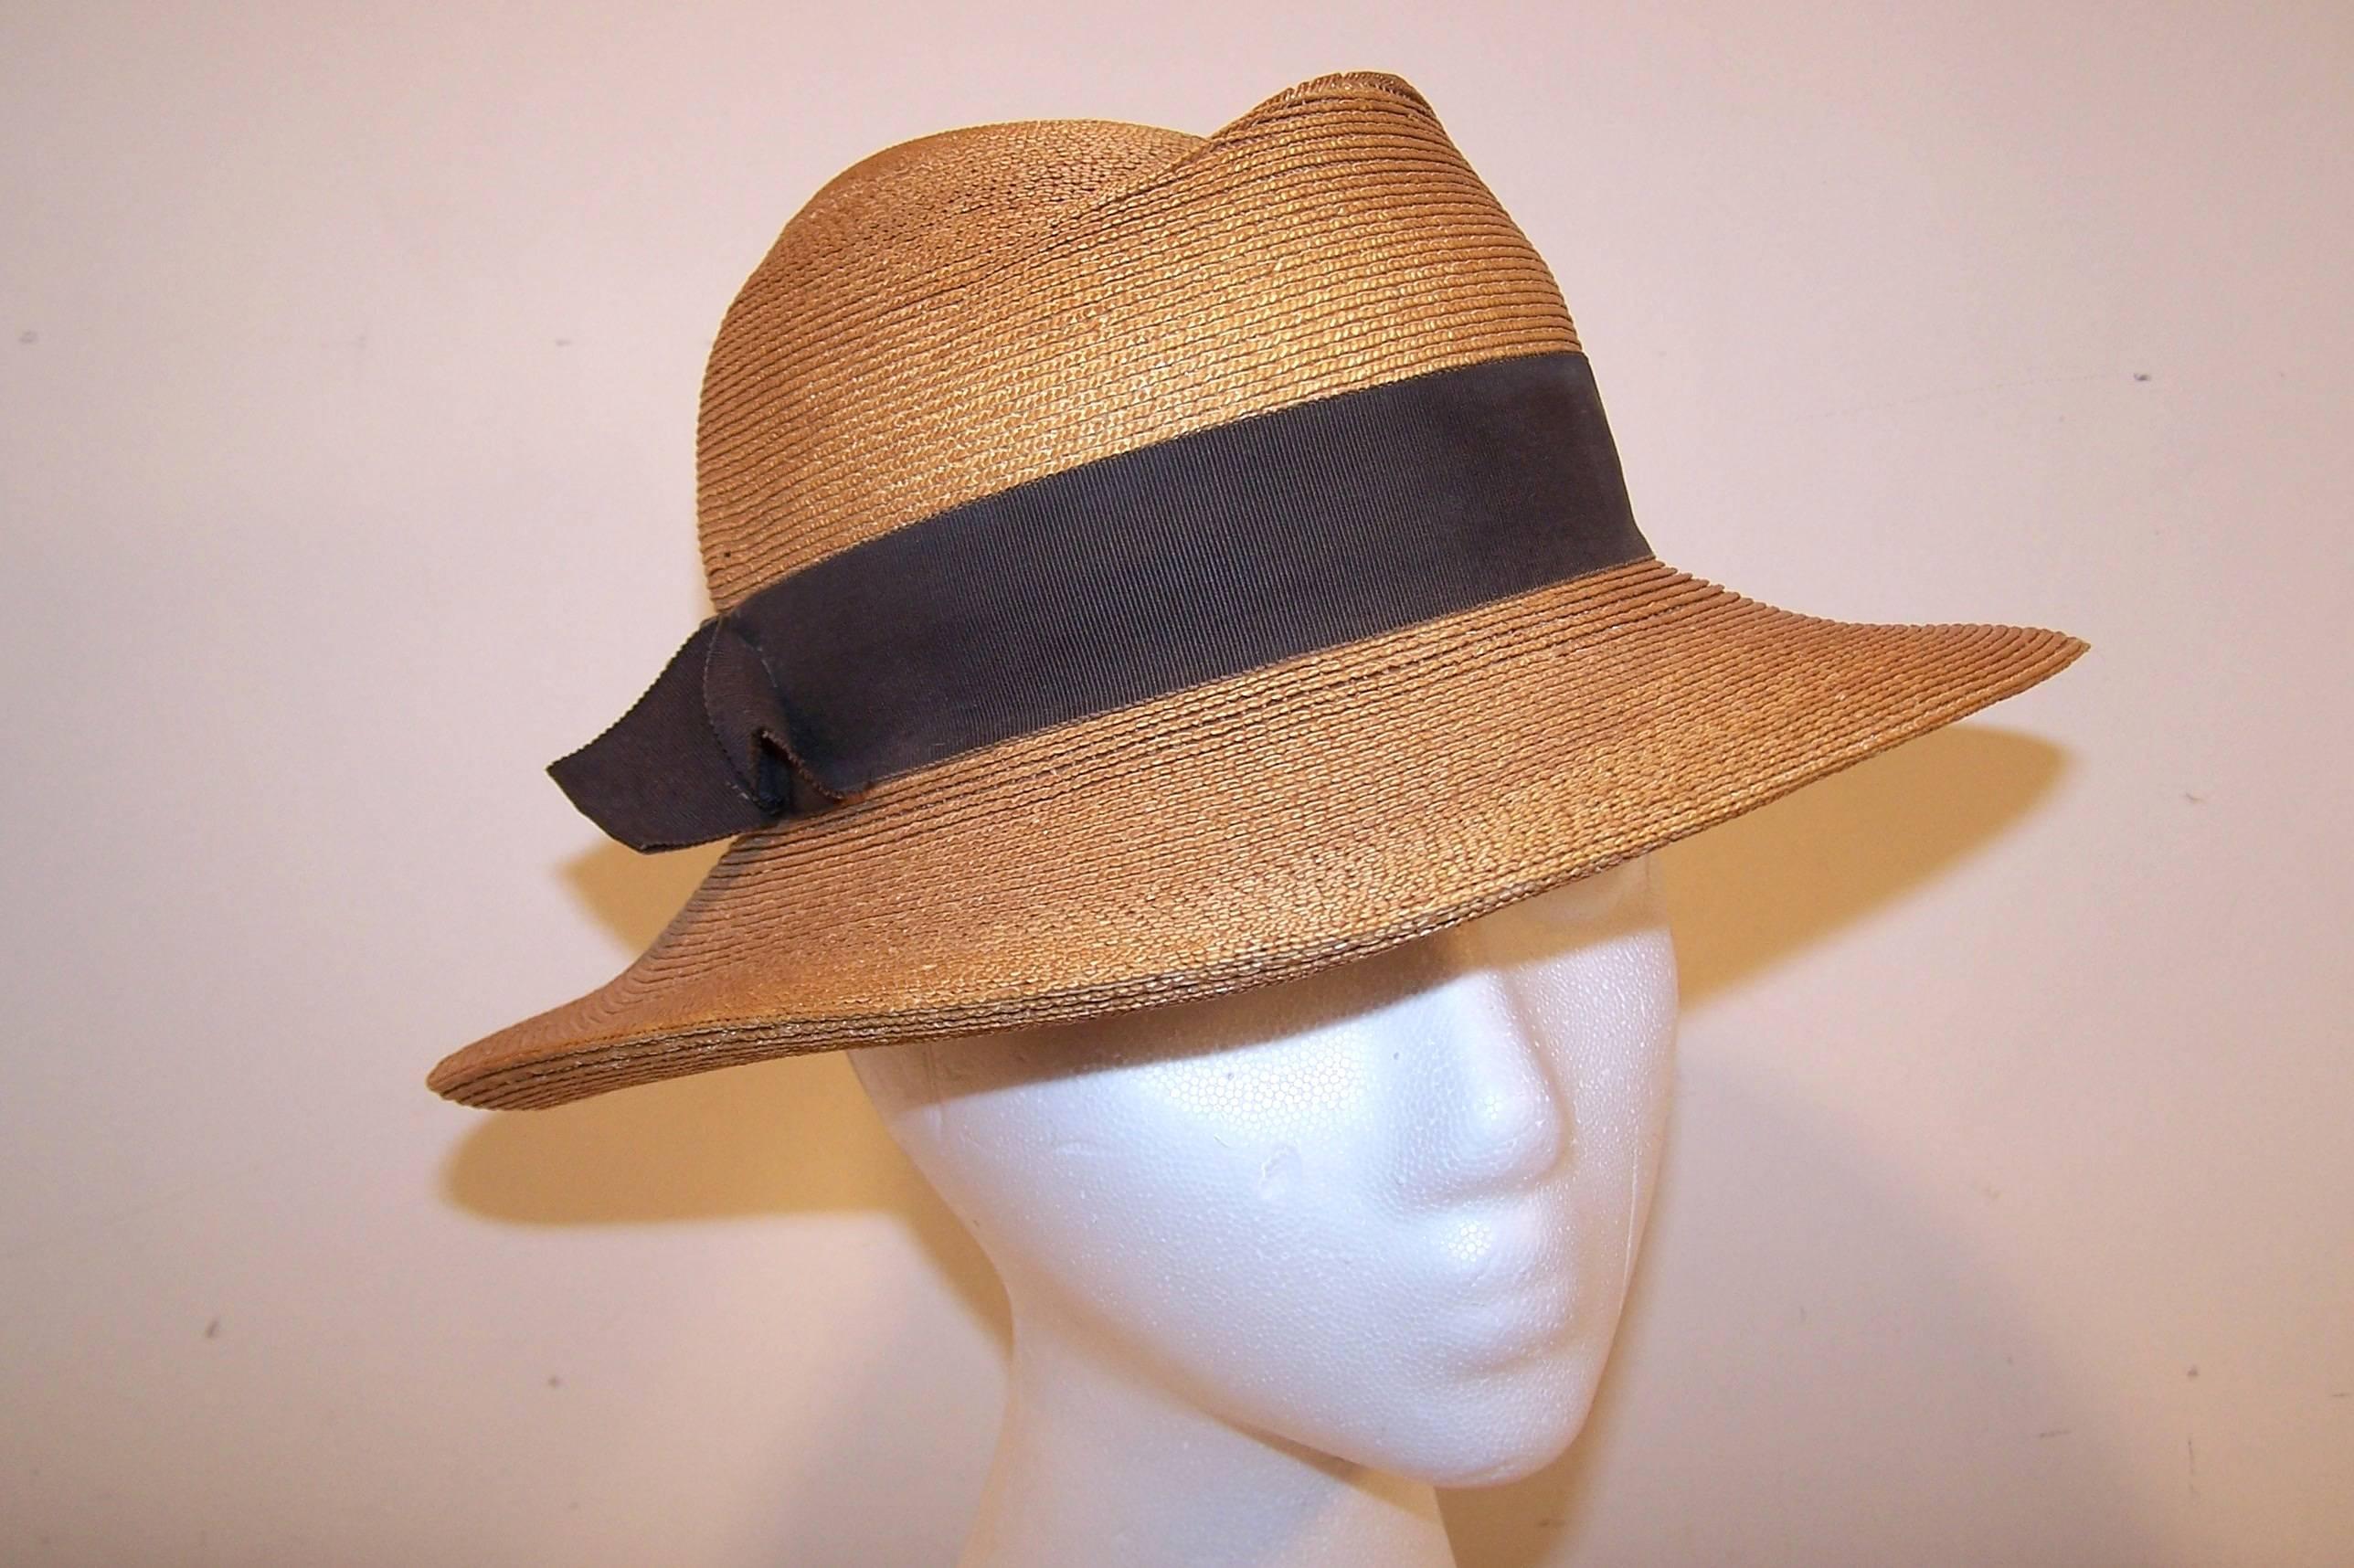 This natural straw fedora hat by Frank Olive is a classic.   The style conjures up images of 1940's menswear summer suits...crisp, detailed and stylized.  It is decorated with a dark brown grosgrain ribbon band on the outside and fleshtone pink band